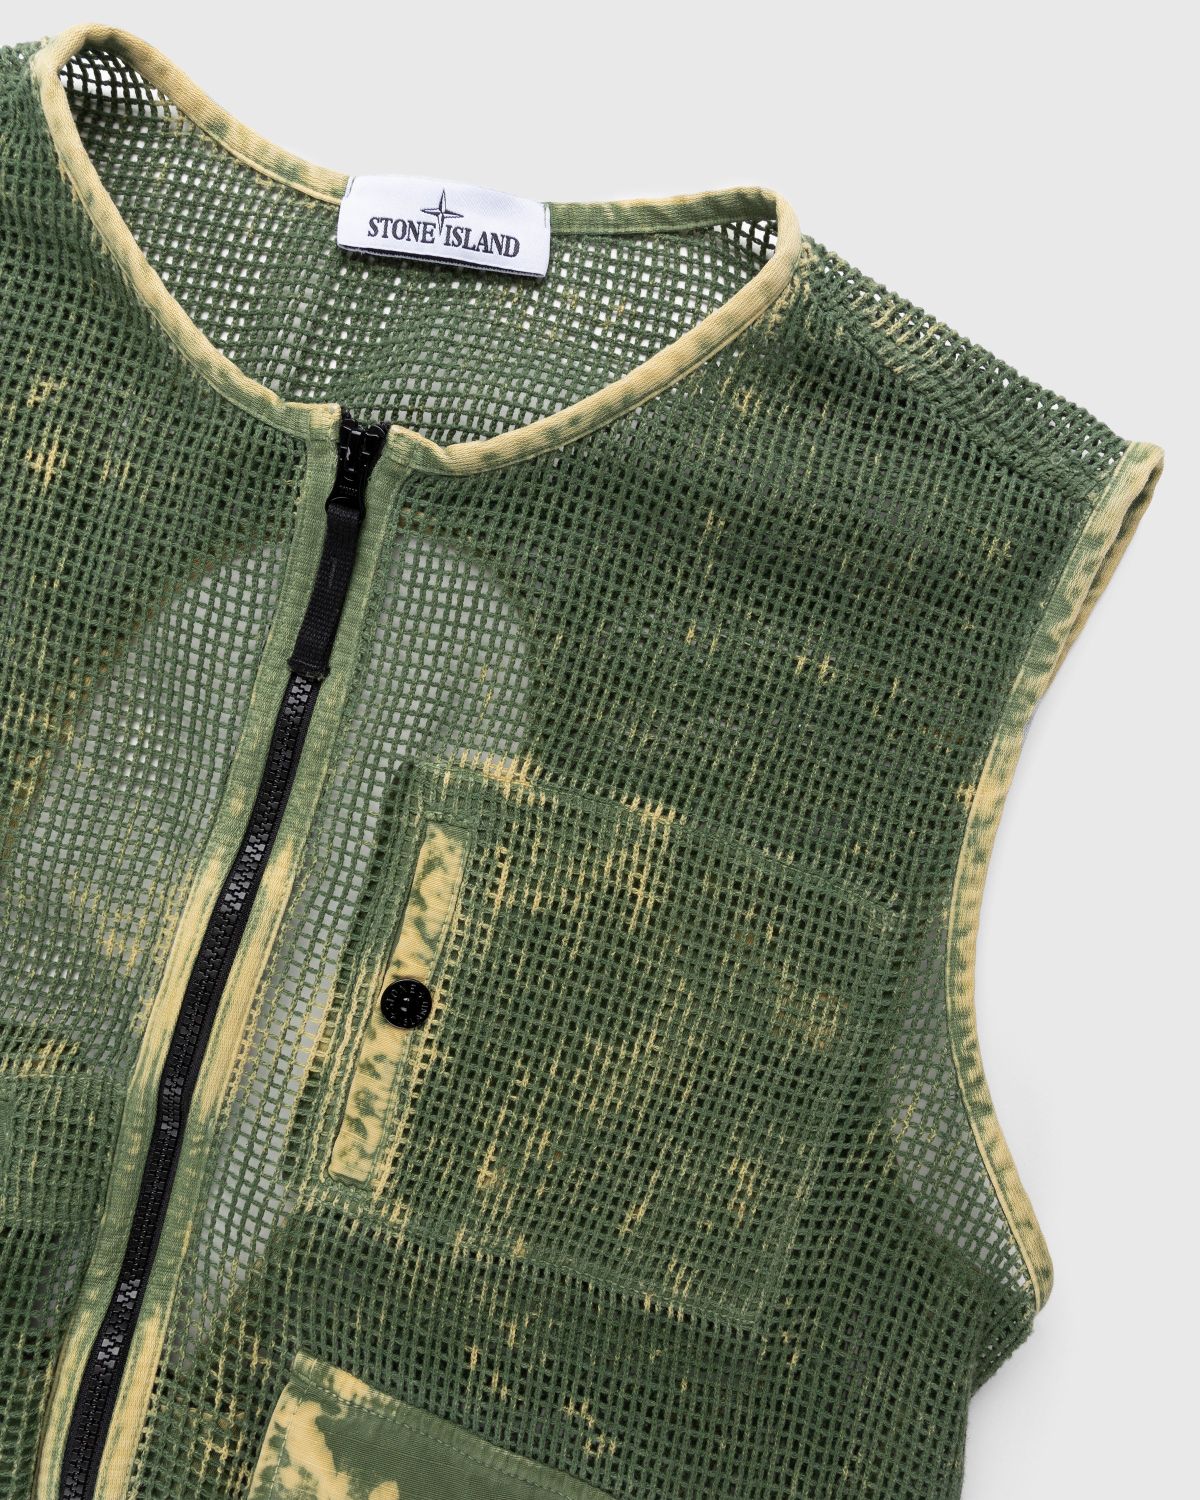 Stone Island – G0622 Garment-Dyed Cotton Mesh Vest Olive - Outerwear - Green - Image 3